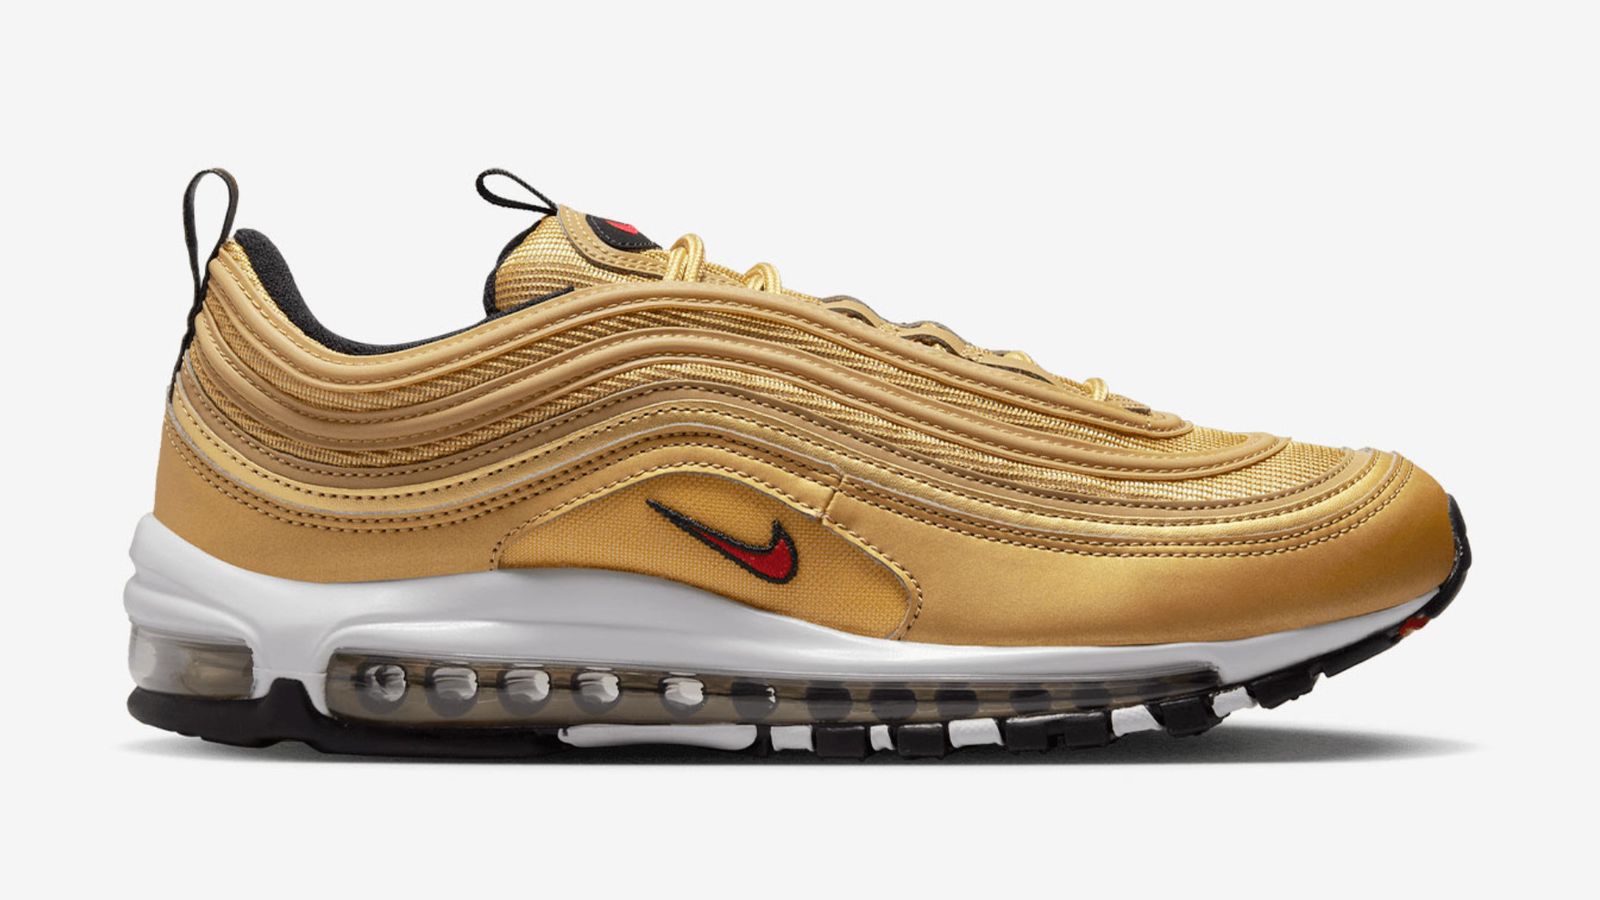 Nike Air Max 97 "Golden Bullet" product image of a gold sneaker with a white midsole, black outsole, and red accents.